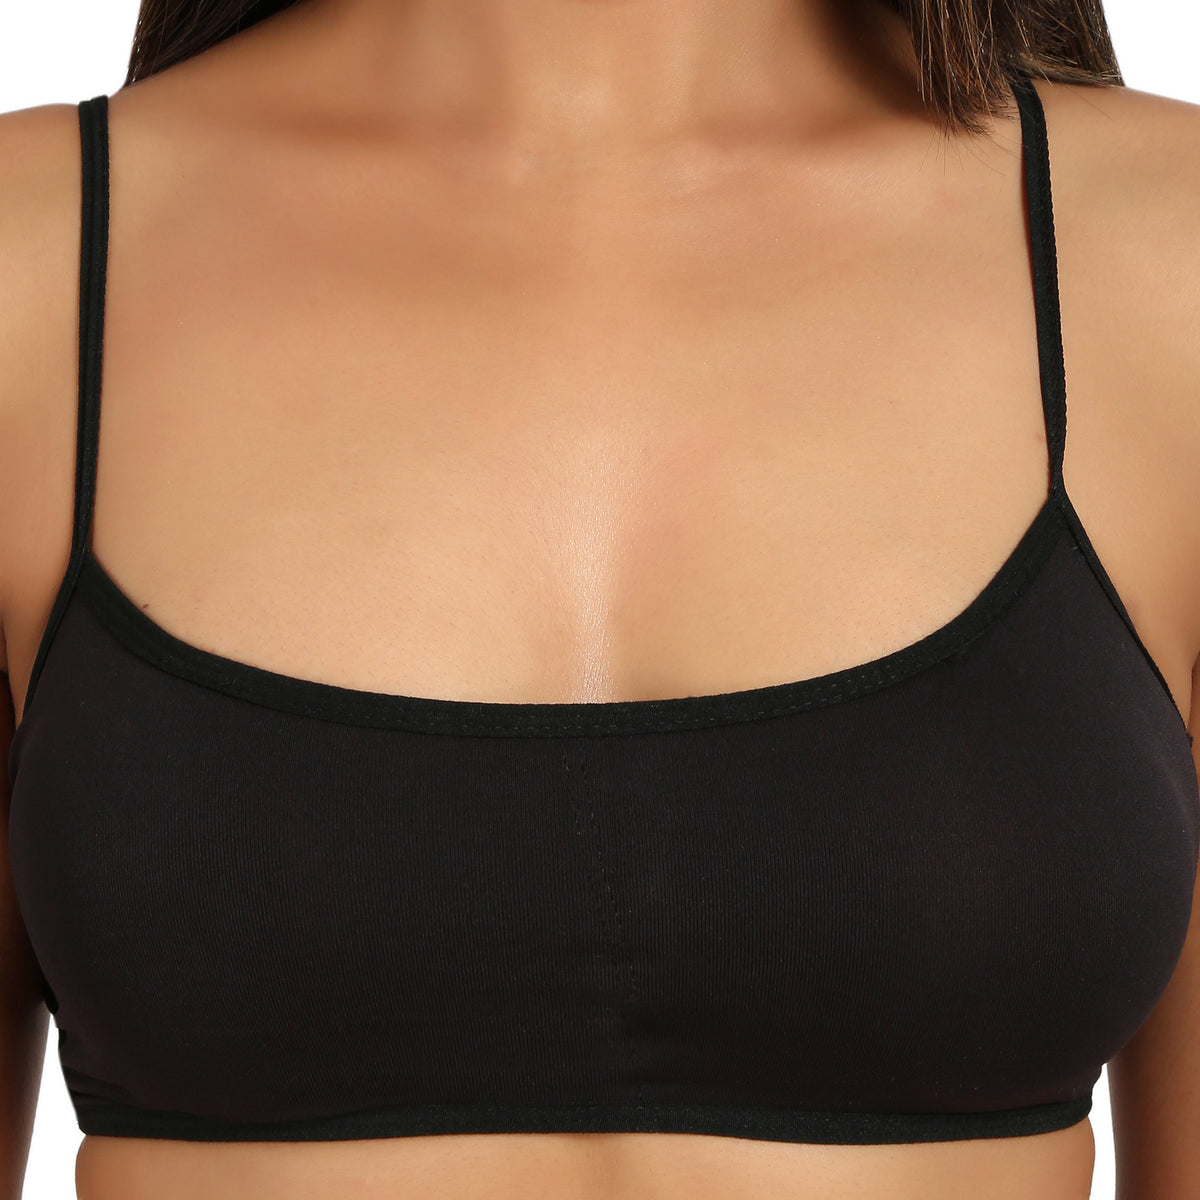 STOCKCLUB Thin Strap Sports Air Bra - Stretchable, Seamless Bras for Women,  Girls - Without Hook, Non Padded